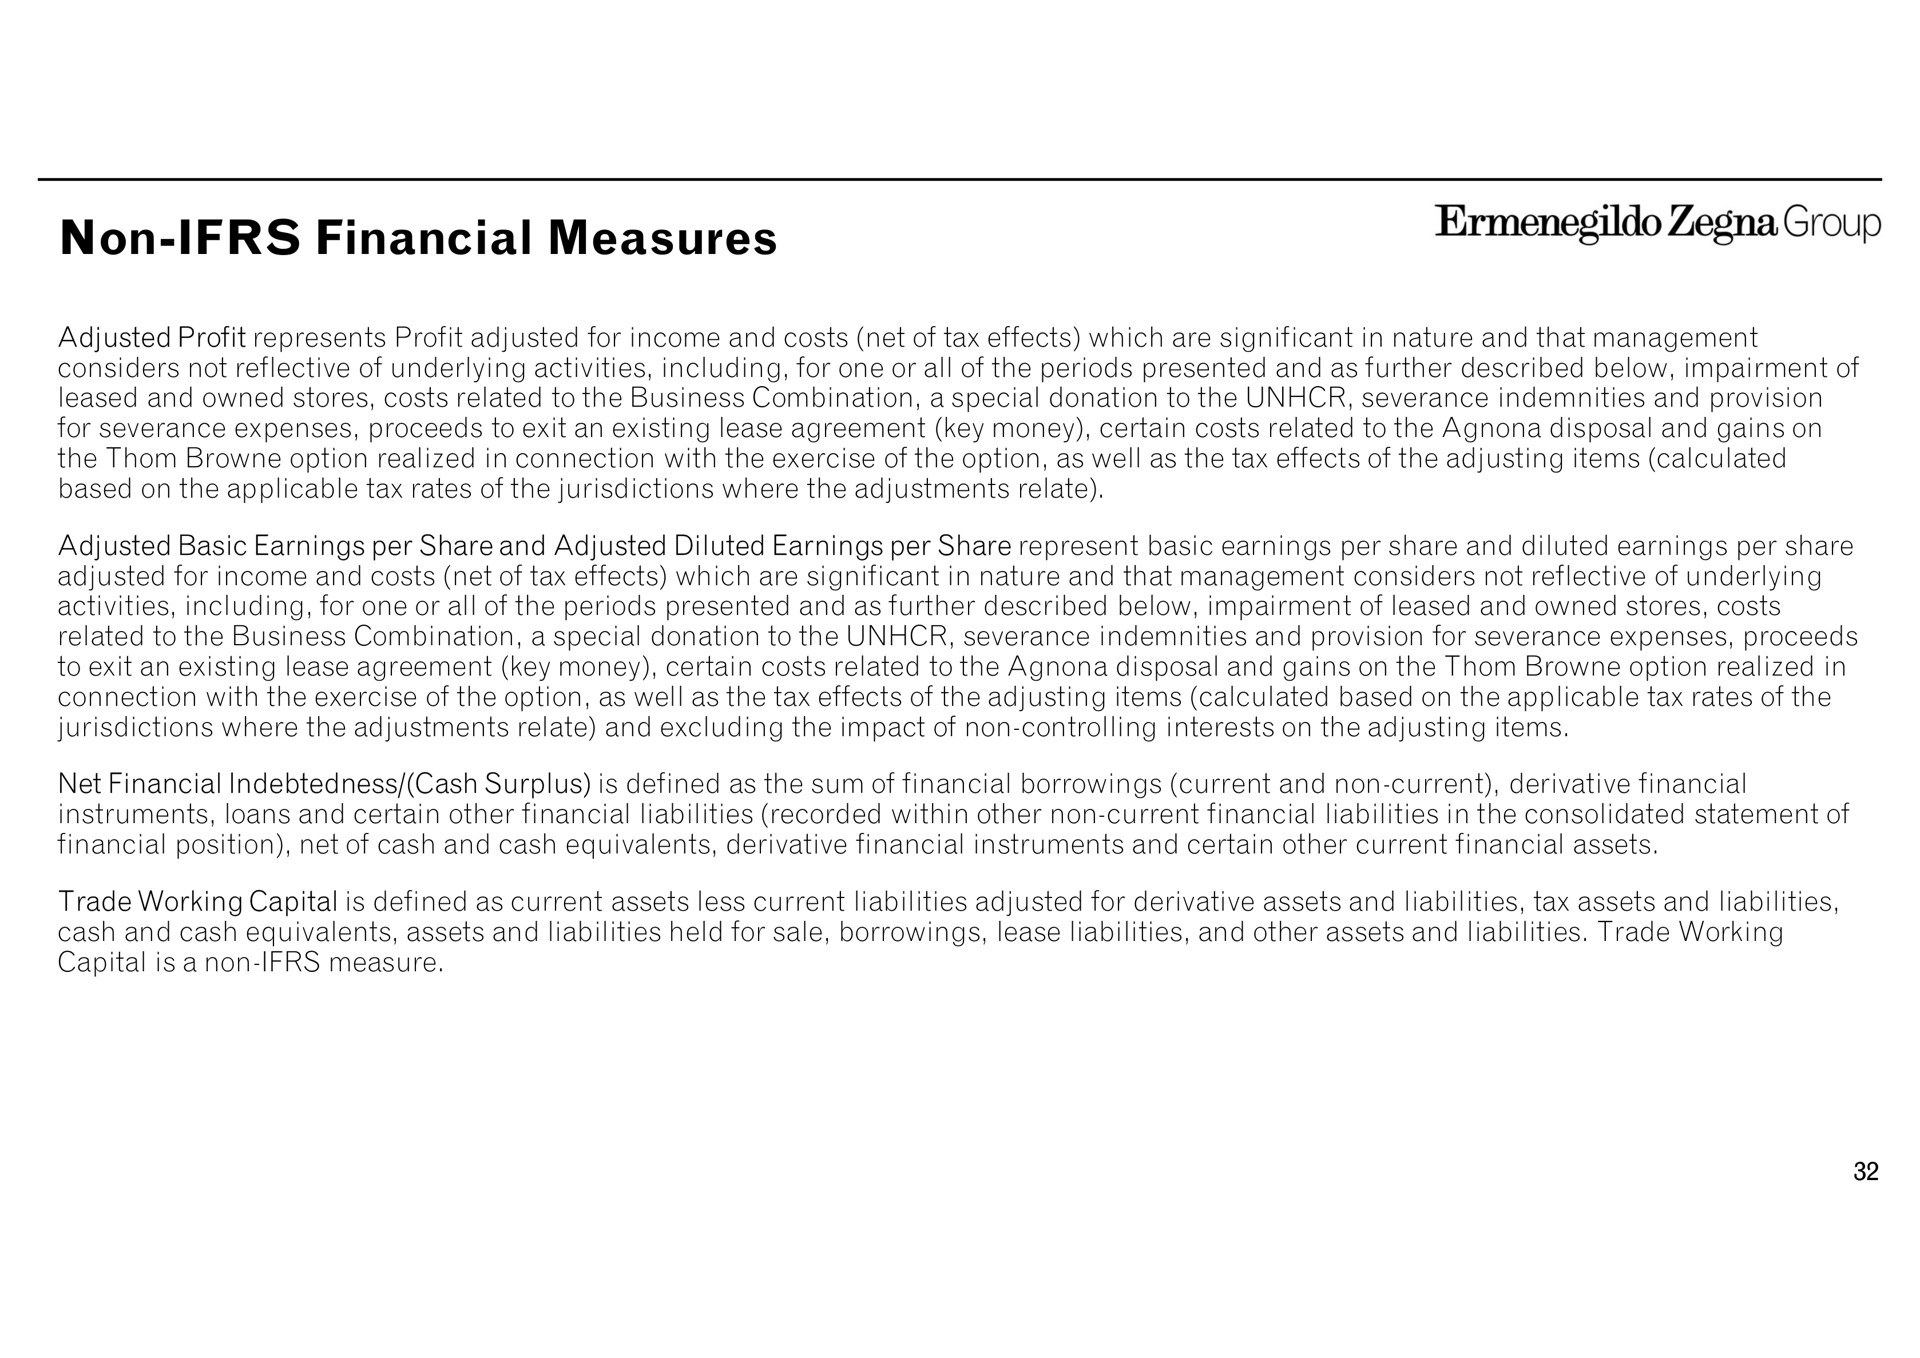 non financial measures group adjusted profit represents profit adjusted for income and costs net of tax effects which are significant in nature and that management considers not reflective of underlying activities including for one or all of the periods presented and as further described below impairment of leased and owned stores costs related to the business combination a special donation to the severance indemnities and provision for severance expenses proceeds to exit an existing lease agreement key money certain costs related to the disposal and gains on the option realized in connection with the exercise of the option as well as the tax effects of the adjusting items calculated based on the applicable tax rates of the jurisdictions where the adjustments relate adjusted basic earnings per share and adjusted diluted earnings per share represent basic earnings per share and diluted earnings per share adjusted for income and costs net of tax effects which are significant in nature and that management considers not reflective of underlying activities including for one or all of the periods presented and as further described below impairment of leased and owned stores costs related to the business combination a special donation to the severance indemnities and provision for severance expenses proceeds to exit an existing lease agreement key money certain costs related to the disposal and gains on the option realized in connection with the exercise of the option as well as the tax effects of the adjusting items calculated based on the applicable tax rates of the jurisdictions where the adjustments relate and excluding the impact of non controlling interests on the adjusting items net indebtedness cash surplus is defined as the sum of borrowings current and non current derivative instruments loans and certain other liabilities recorded within other non current liabilities in the consolidated statement of position net of cash and cash equivalents derivative instruments and certain other current assets trade working capital is defined as current assets less current liabilities adjusted for derivative assets and liabilities tax assets and liabilities cash and cash equivalents assets and liabilities held for sale borrowings lease liabilities and other assets and liabilities trade working capital is anon measure | Zegna